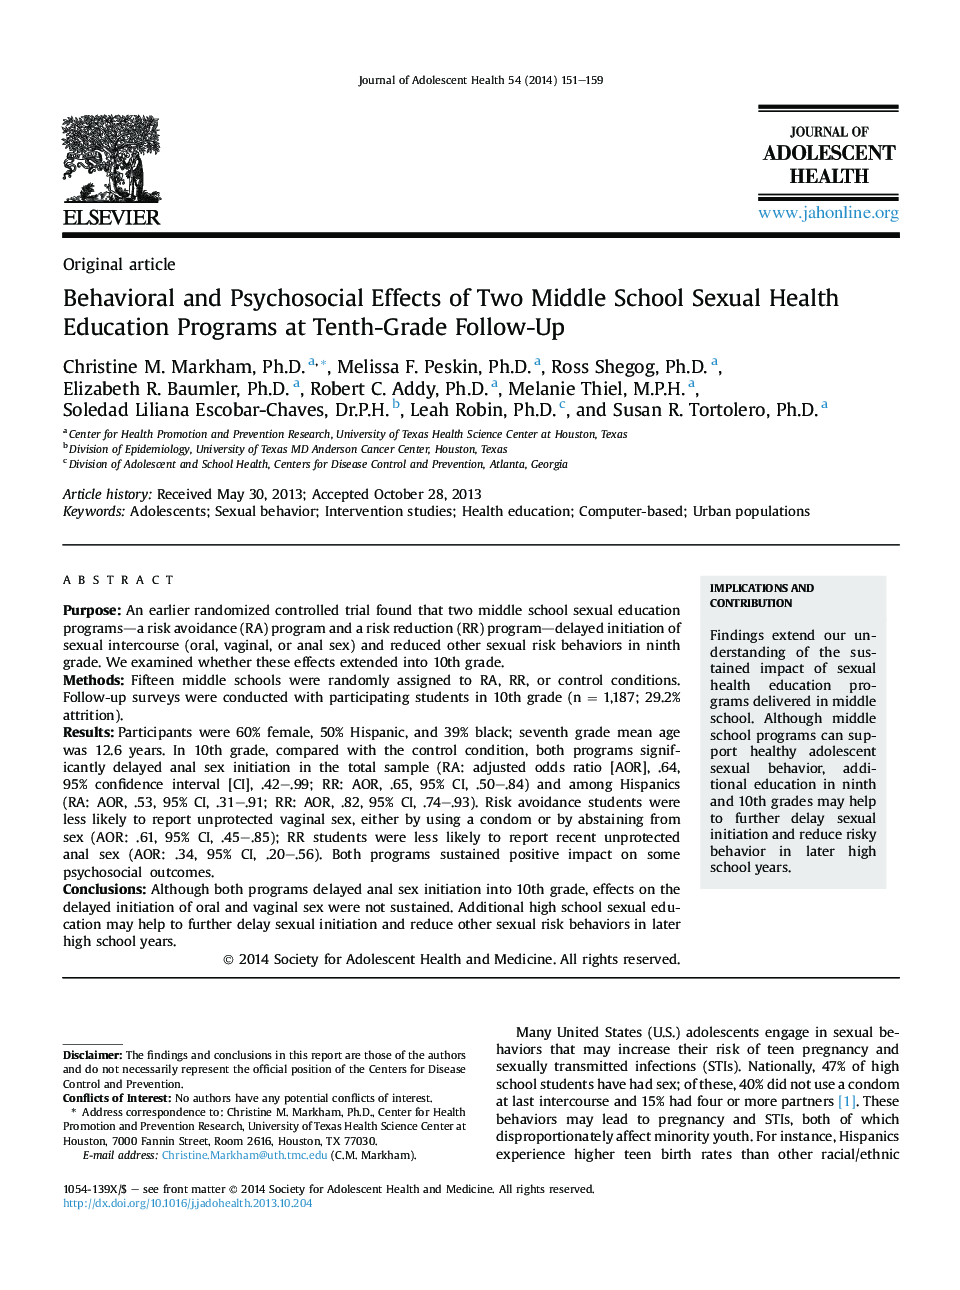 Behavioral and Psychosocial Effects of Two Middle School Sexual Health Education Programs at Tenth-Grade Follow-Up 